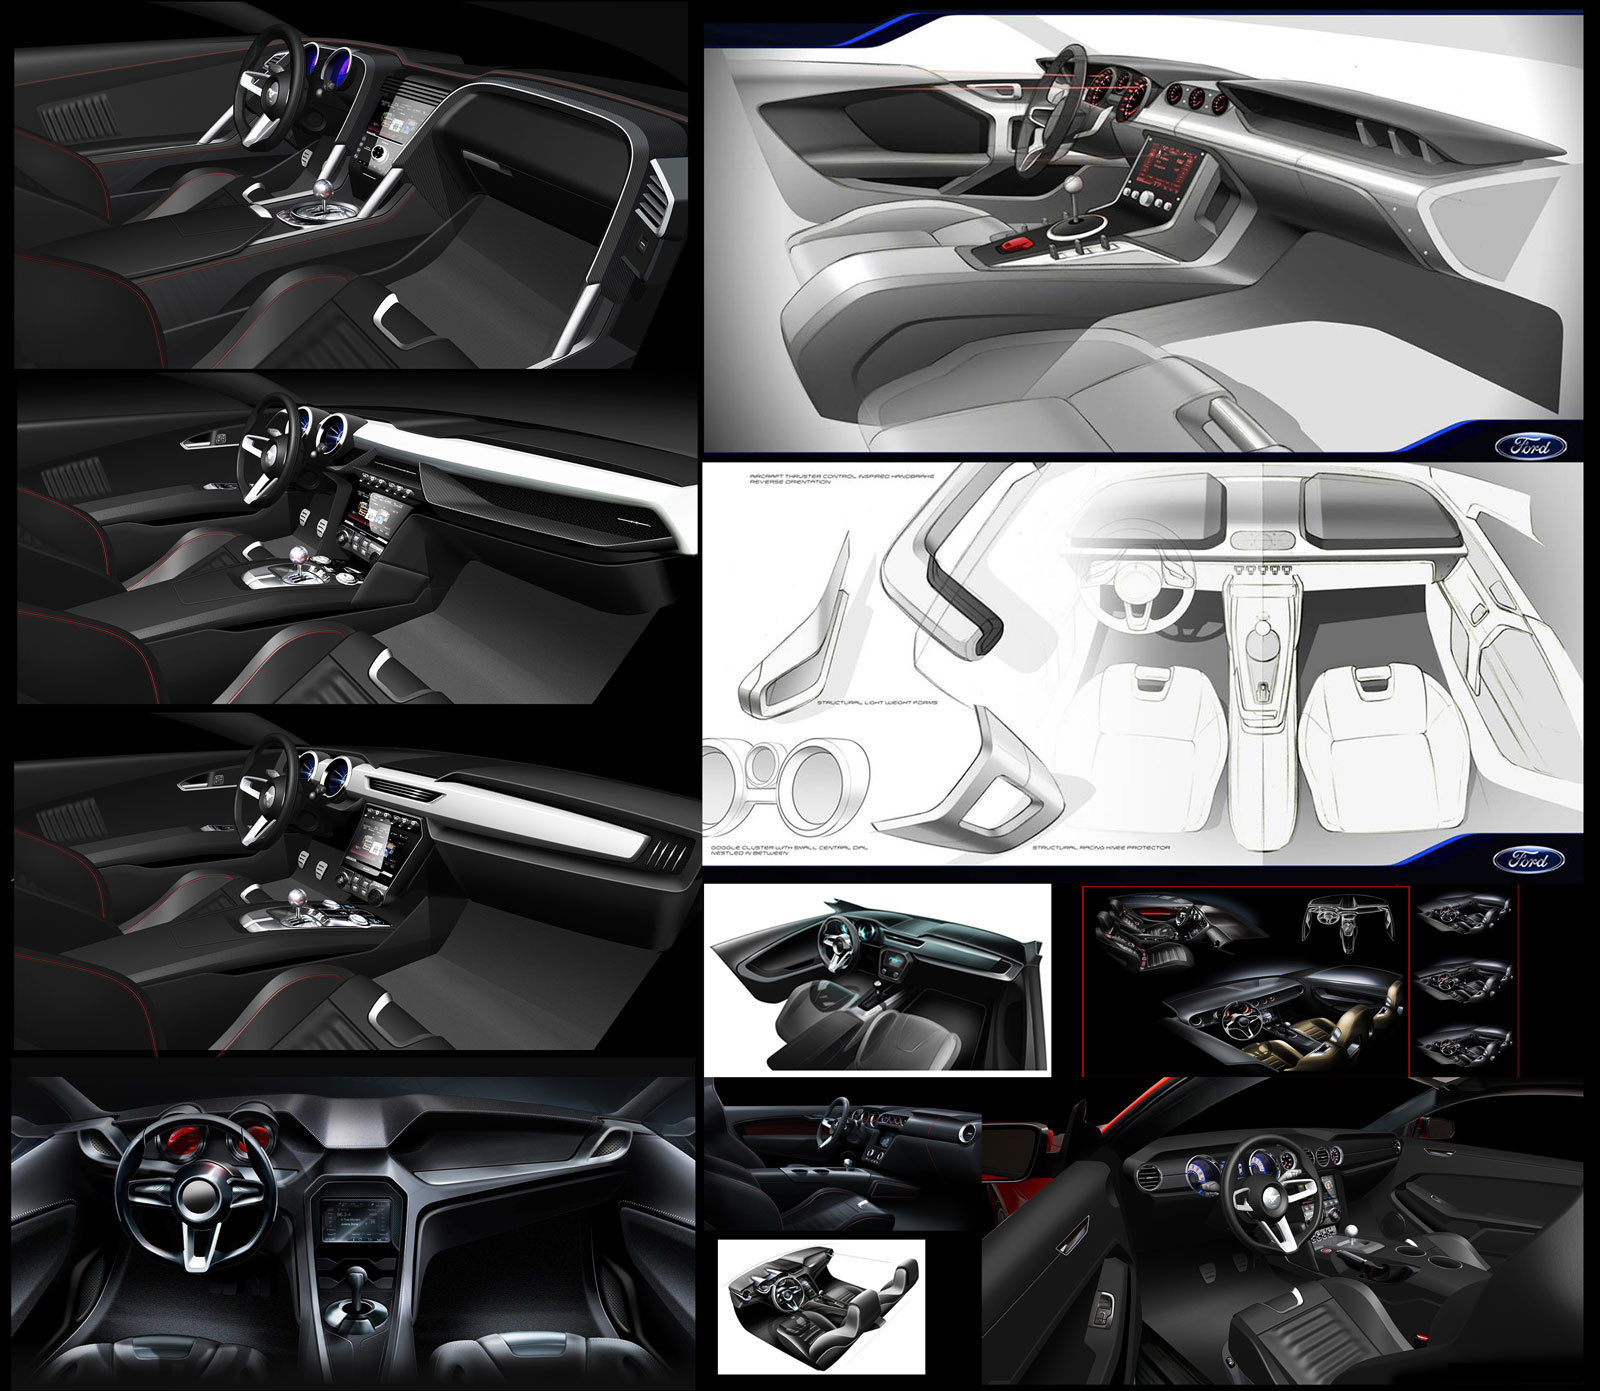 02-2015-Ford-Mustang-Interior-design-sketches.jpg